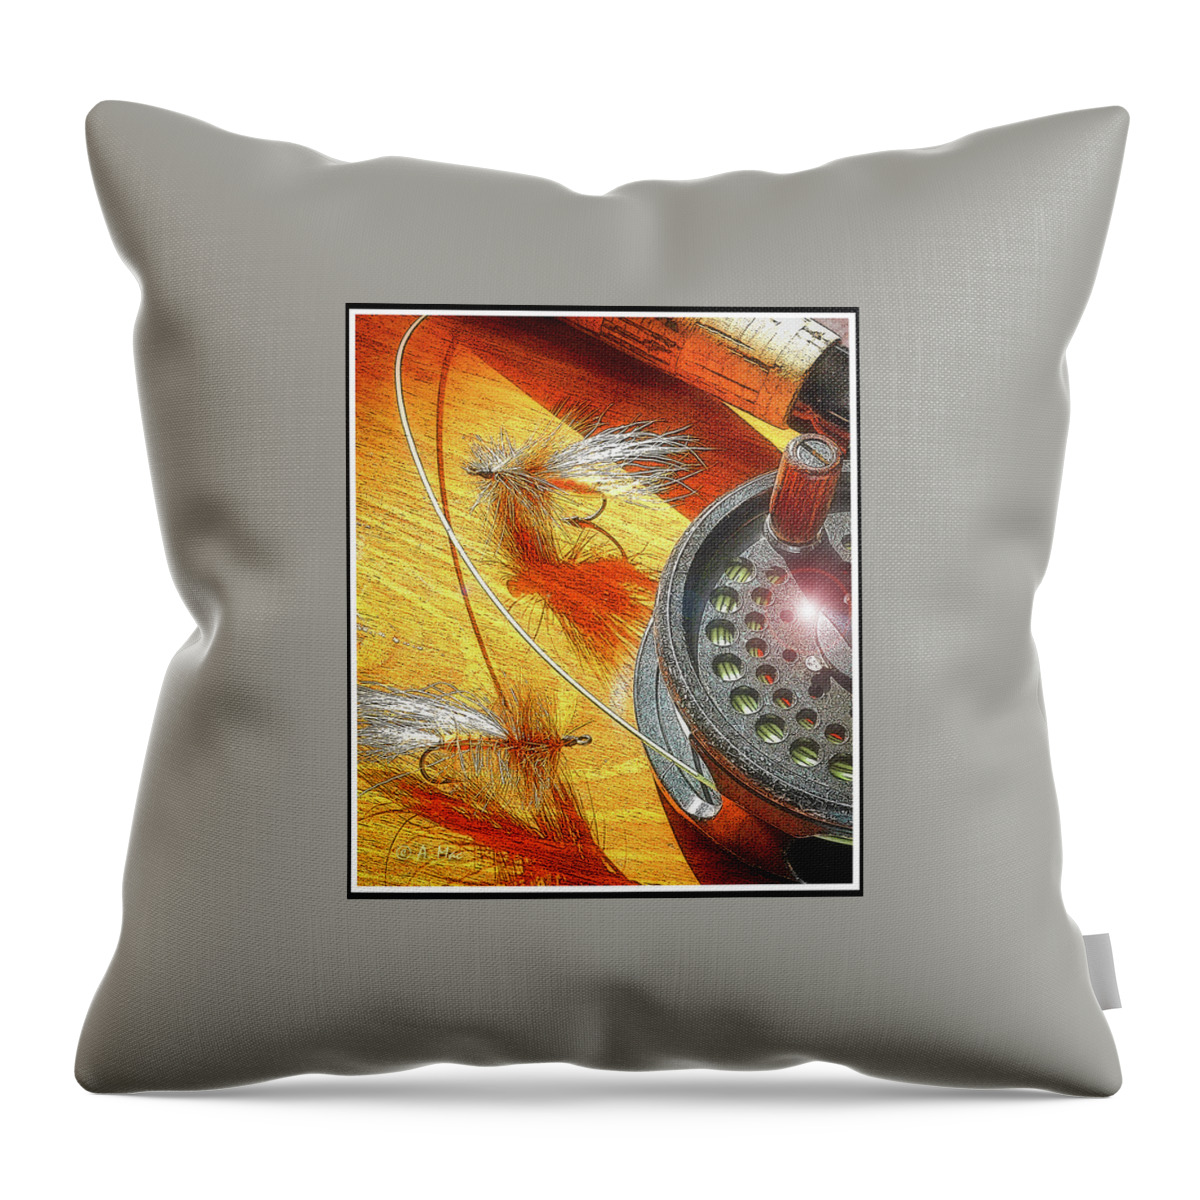 Fishing Throw Pillow featuring the photograph Fly Fisherman's Table, Digital Art by A Macarthur Gurmankin